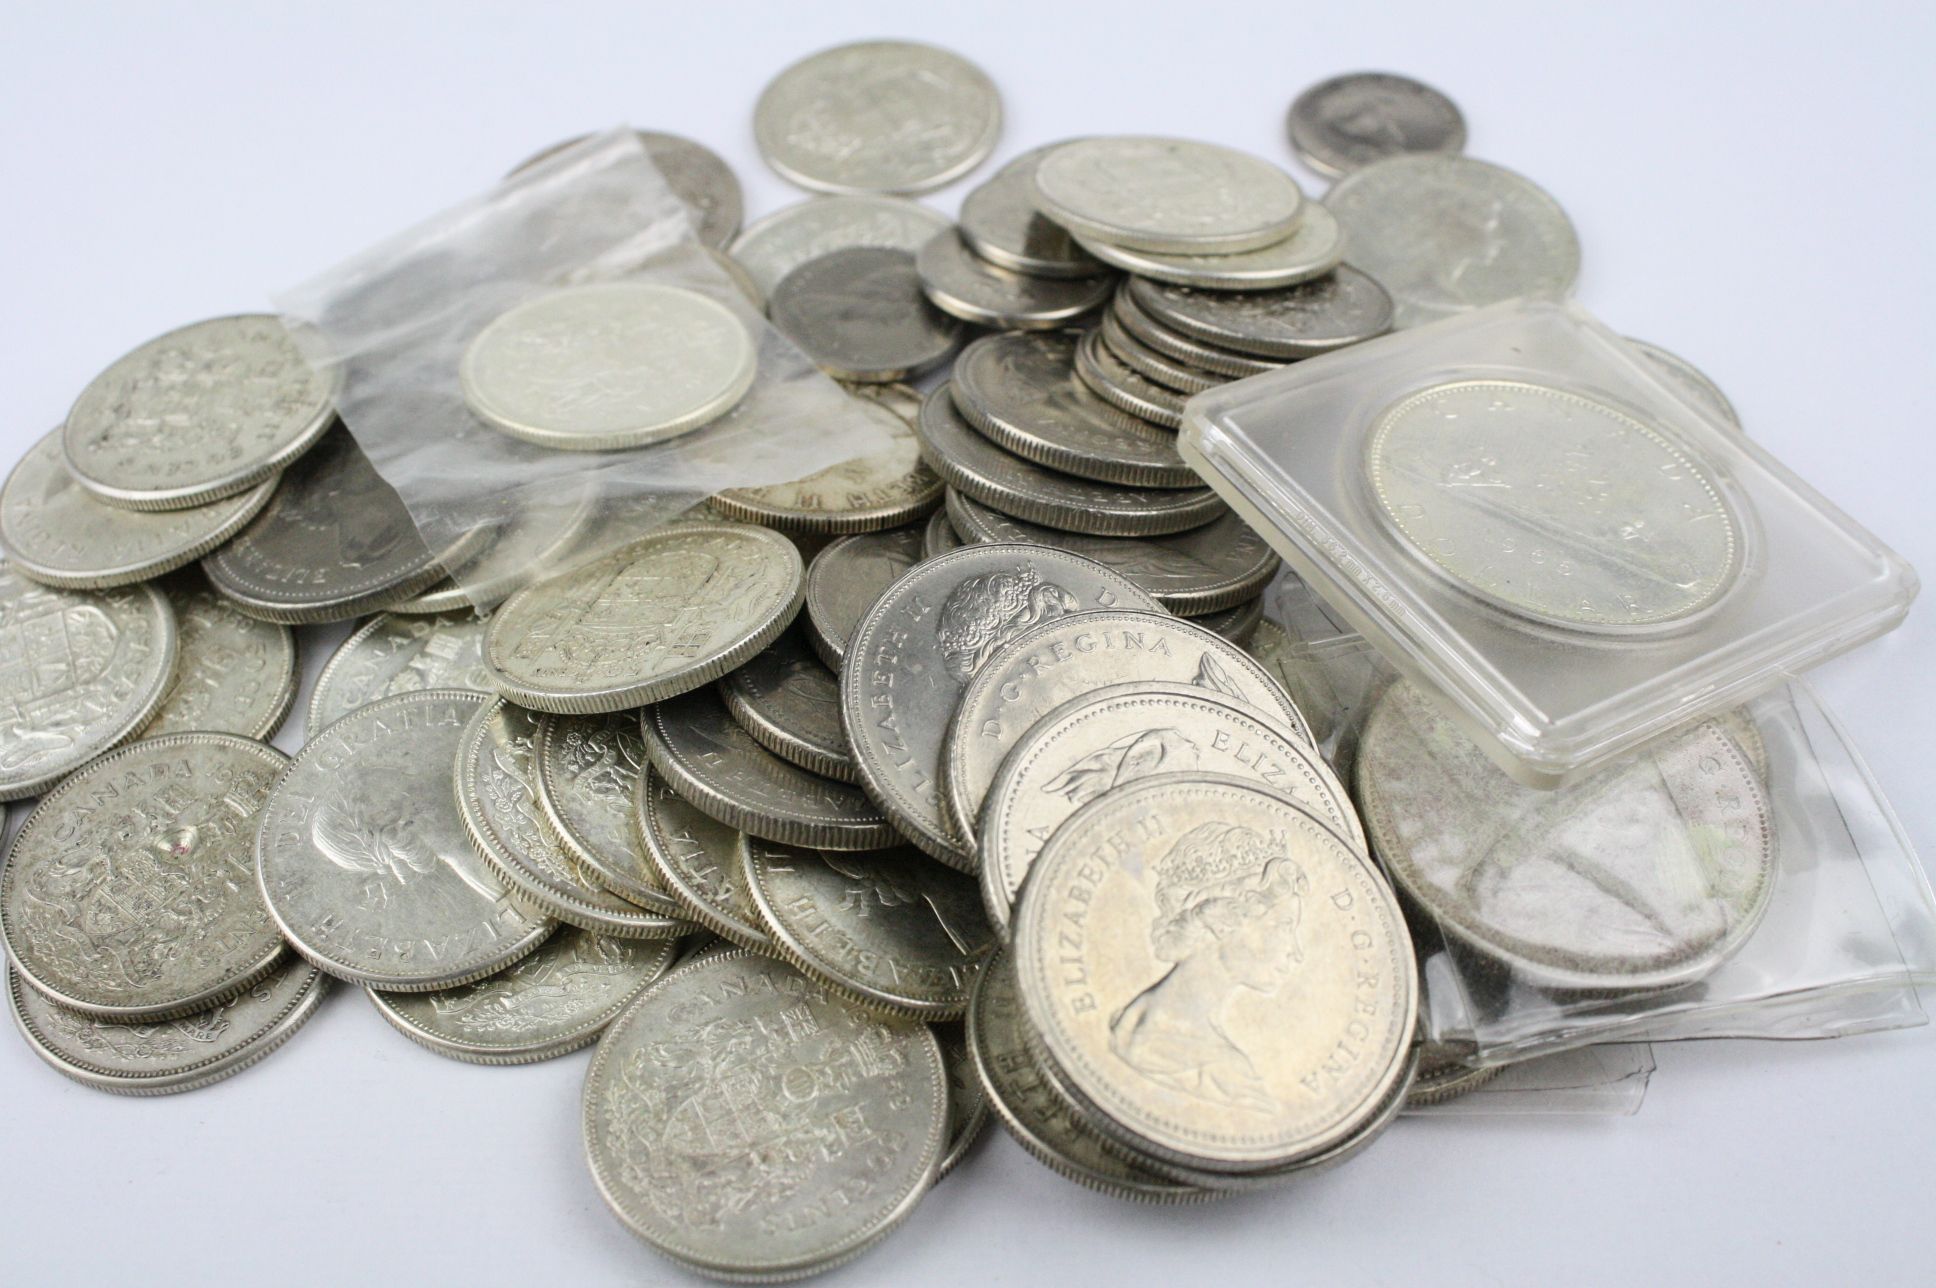 Large collection of Canadian Queen Elizabeth II coins to include Silver Dollars, 50 cent Half